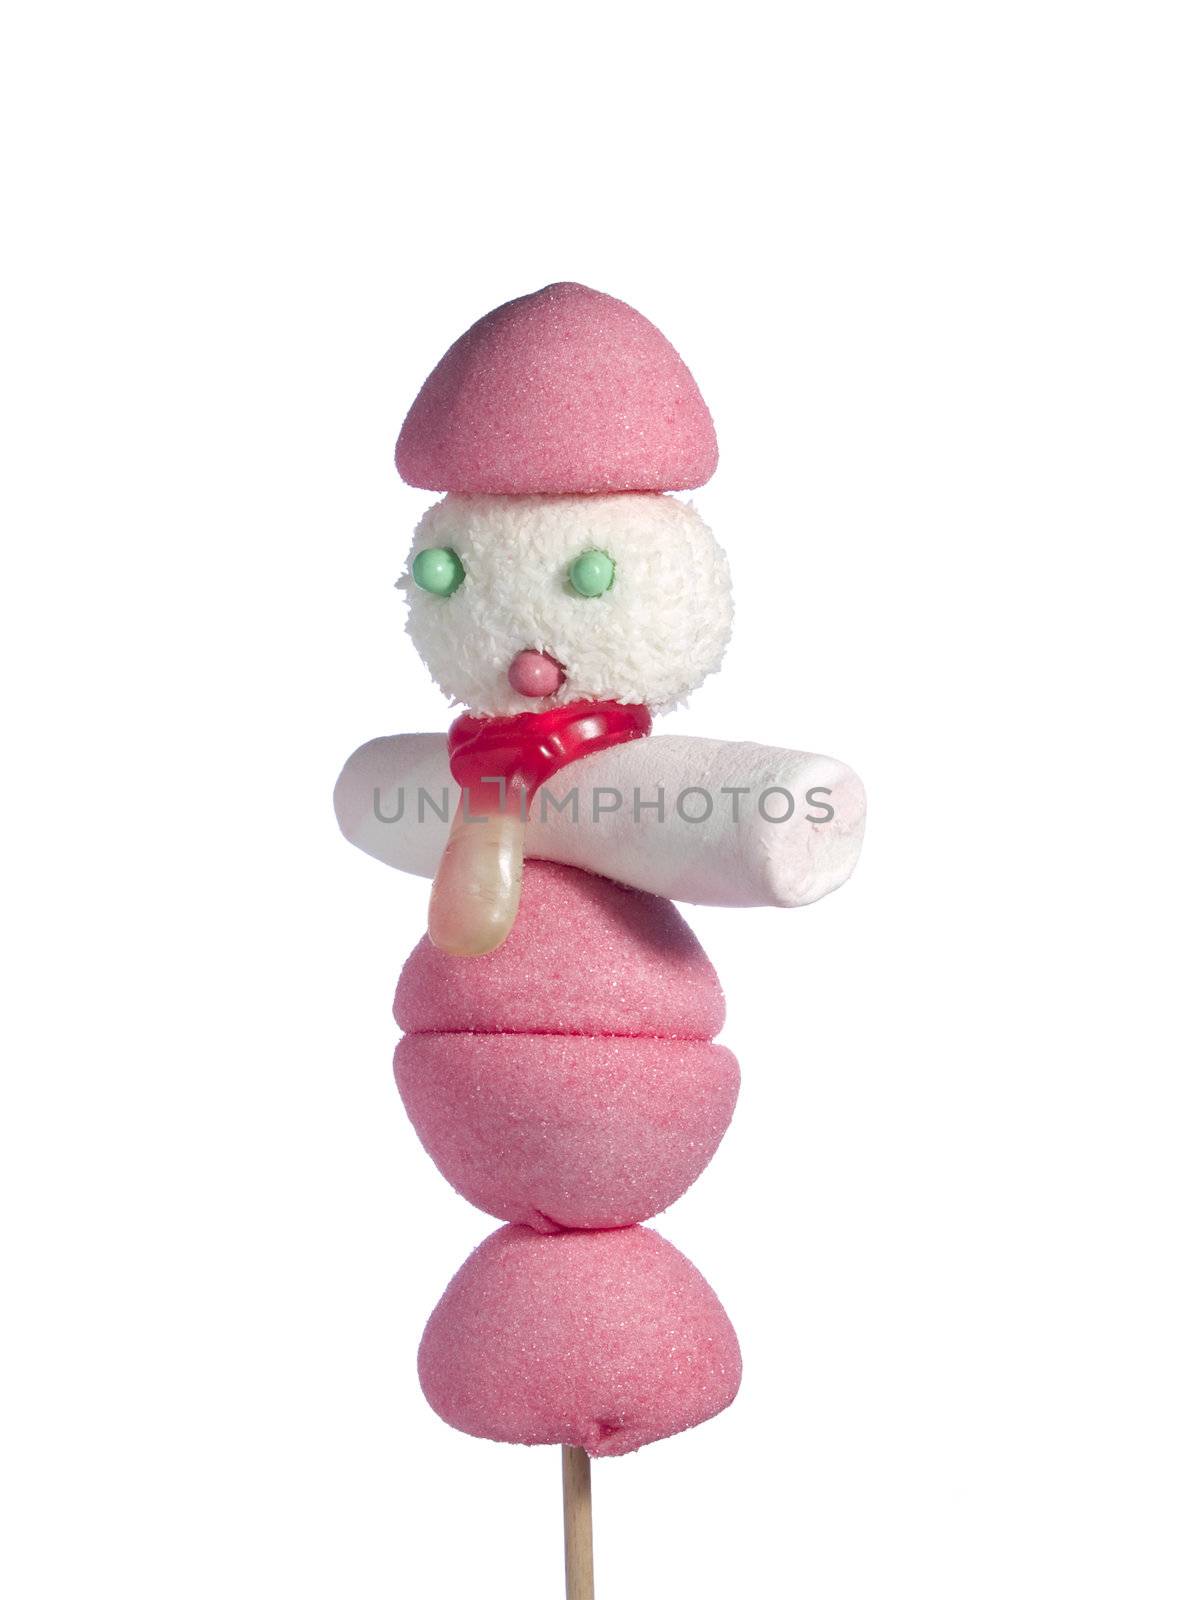 A male figurine made out of candies on a stick over a white background.